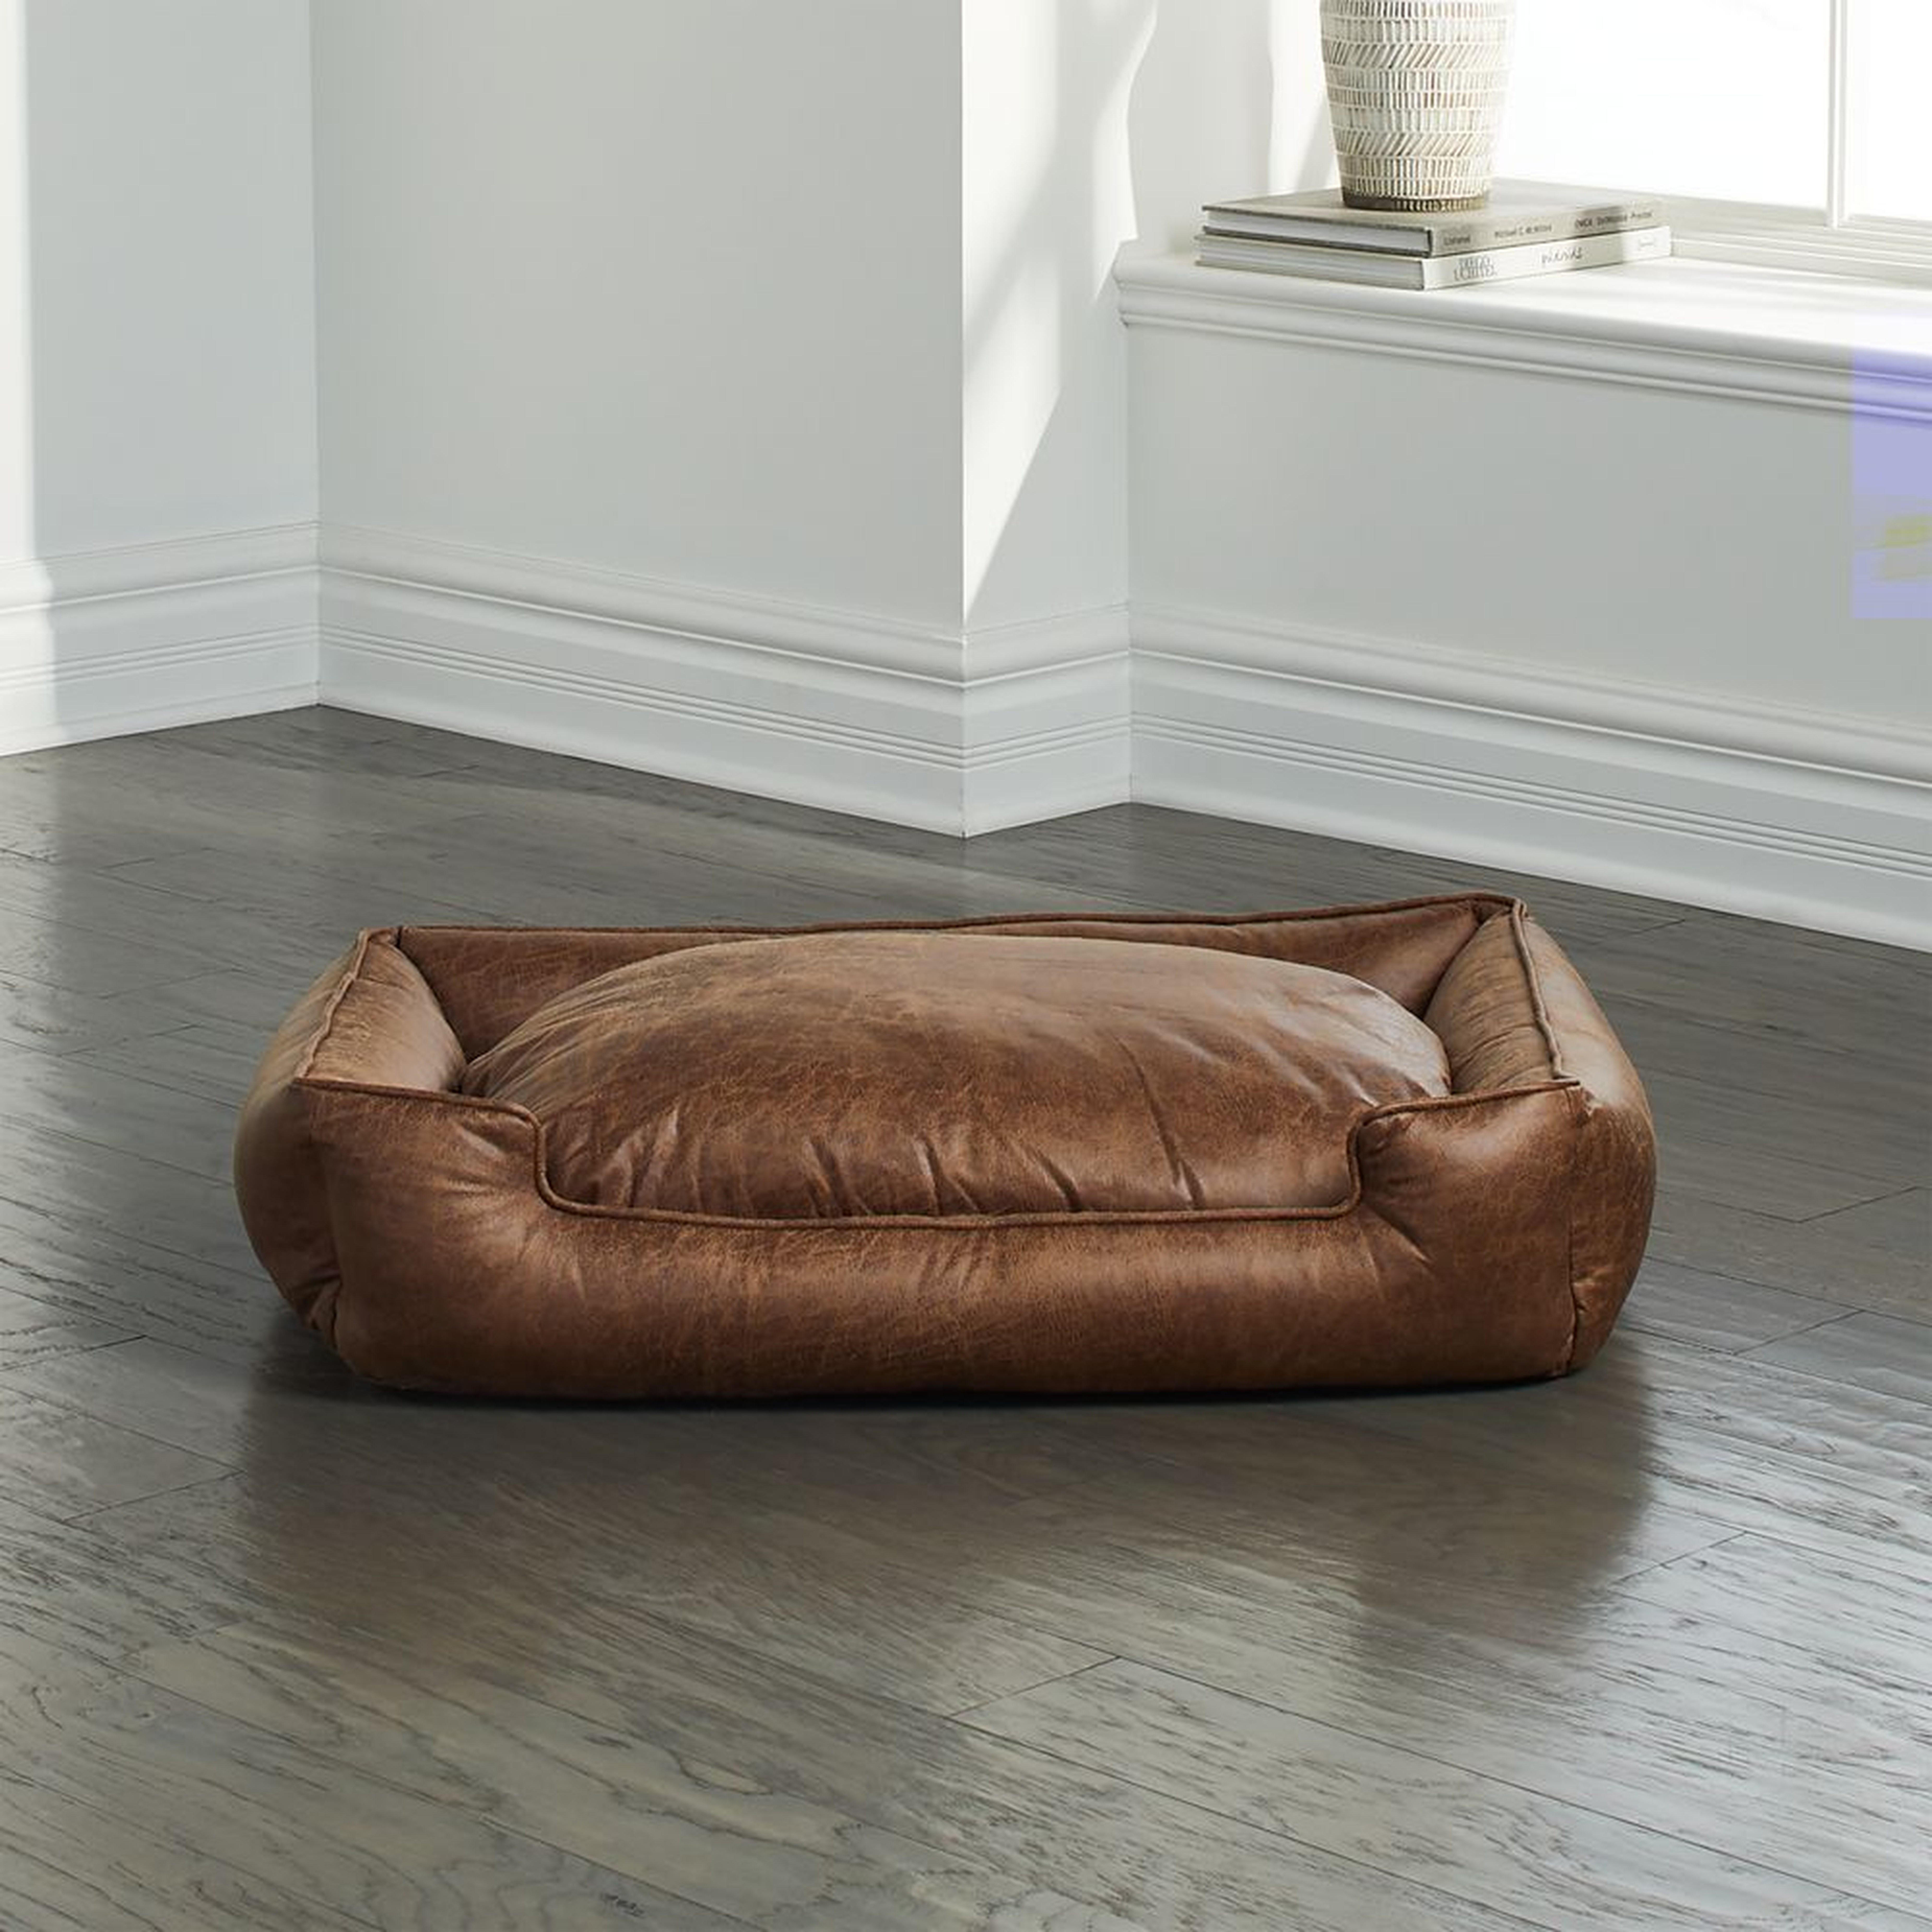 Lounge Faux Leather Vintage Medium Dog Bed - Crate and Barrel